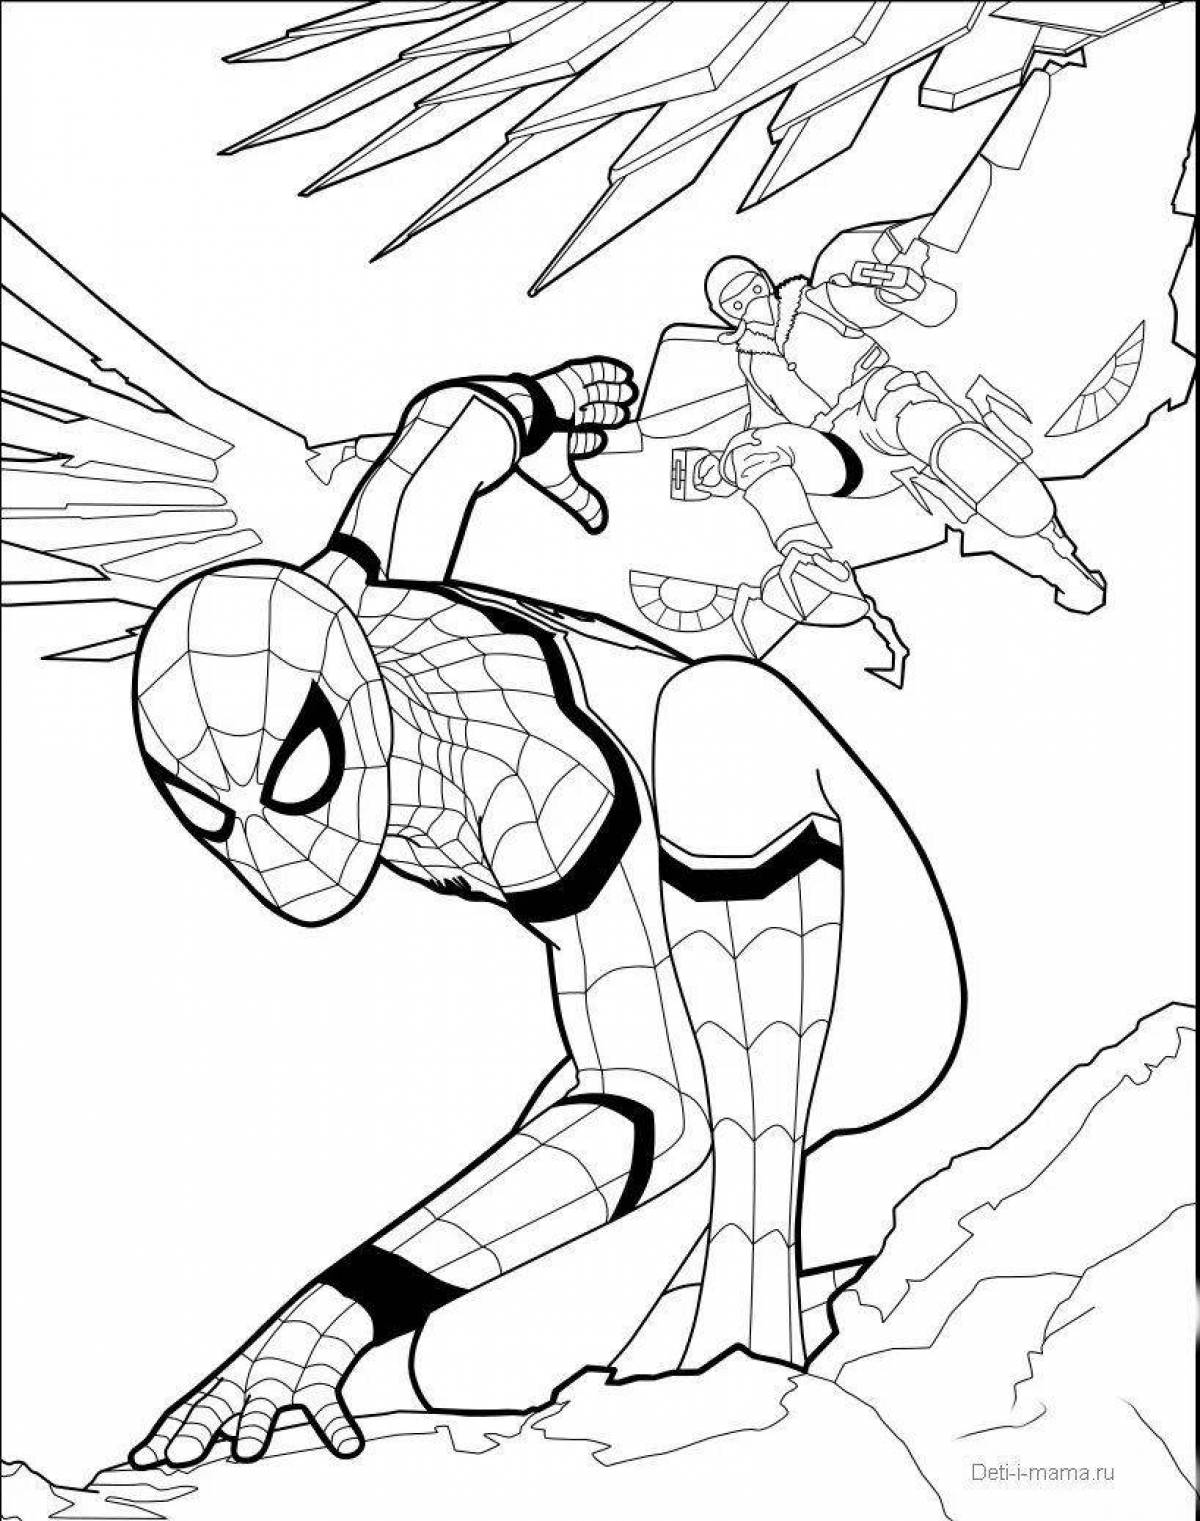 Dazzling spiderman with shield coloring book